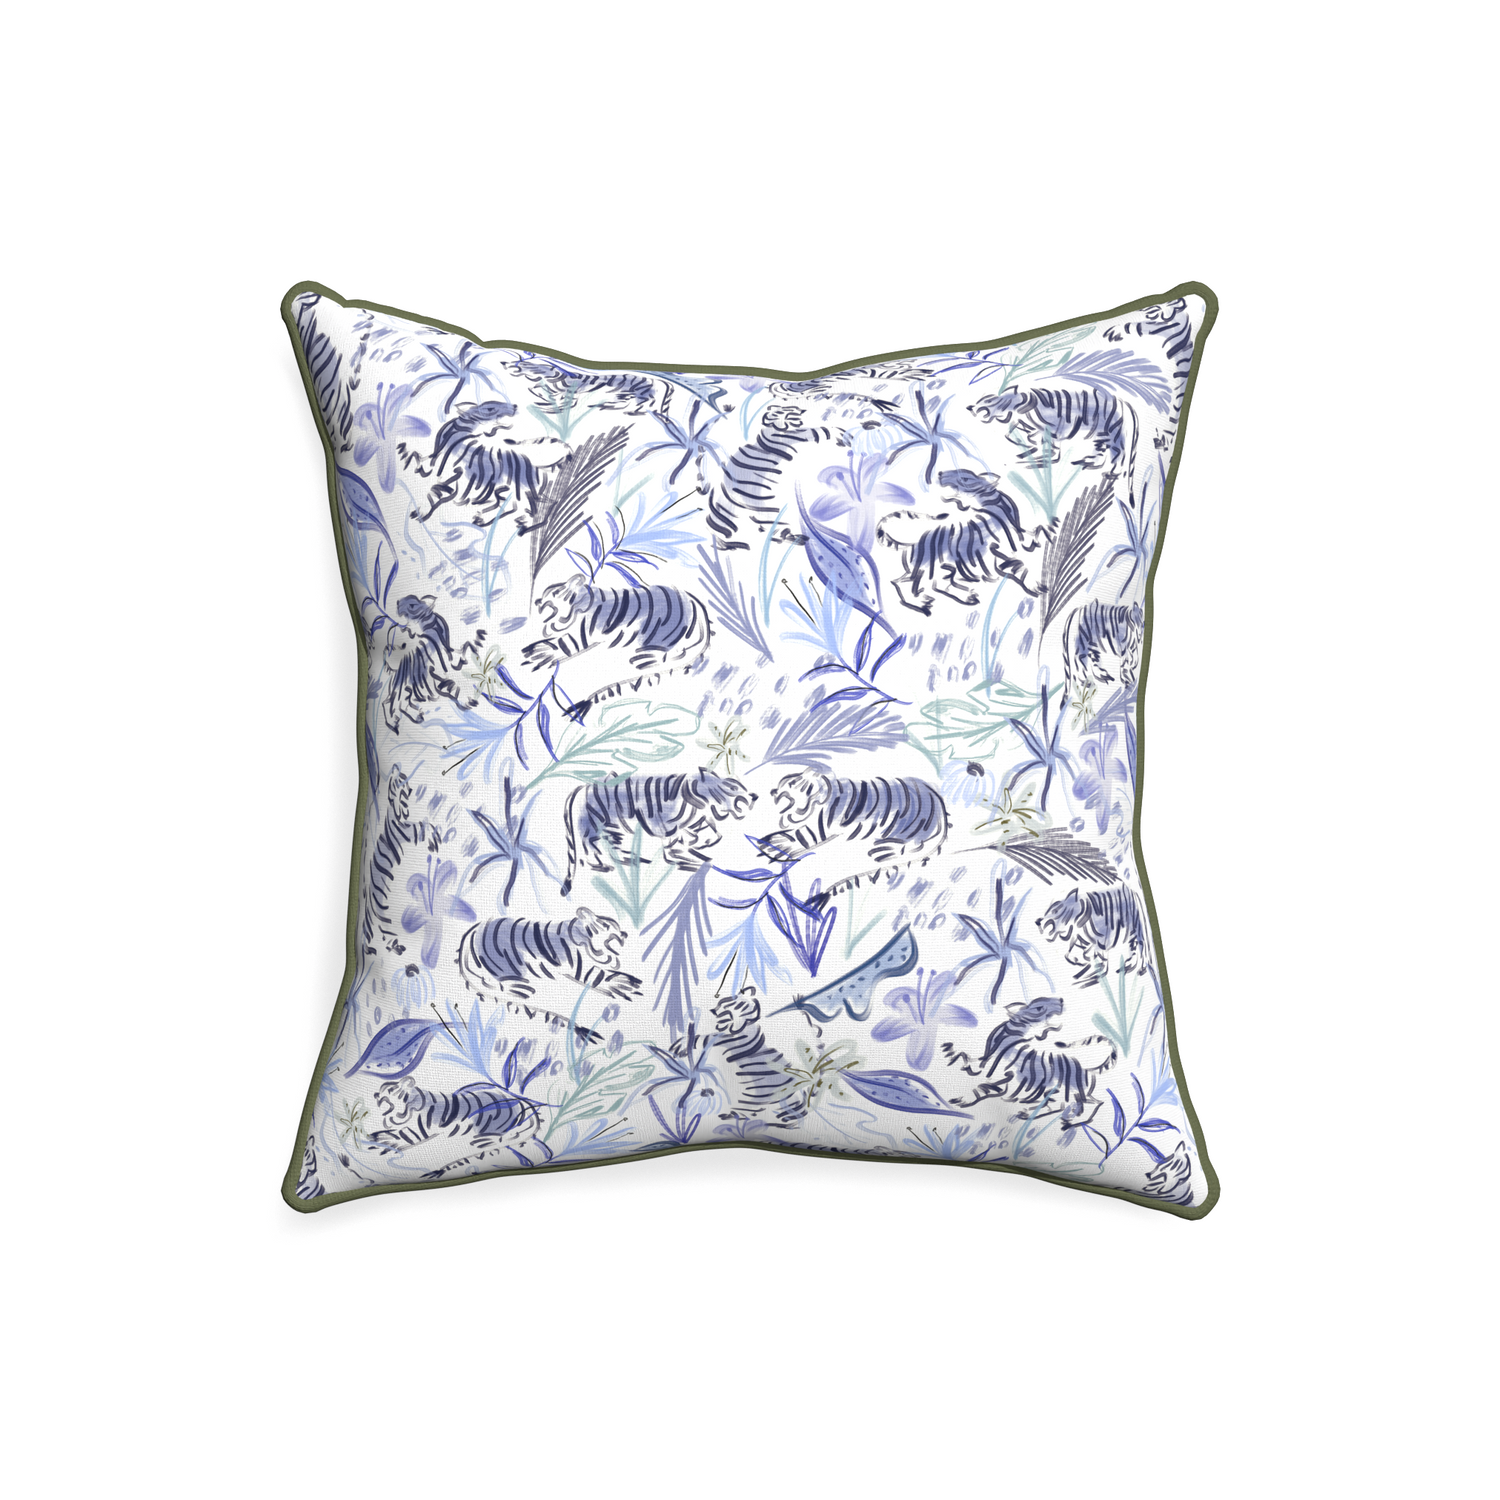 20-square frida blue custom blue with intricate tiger designpillow with f piping on white background